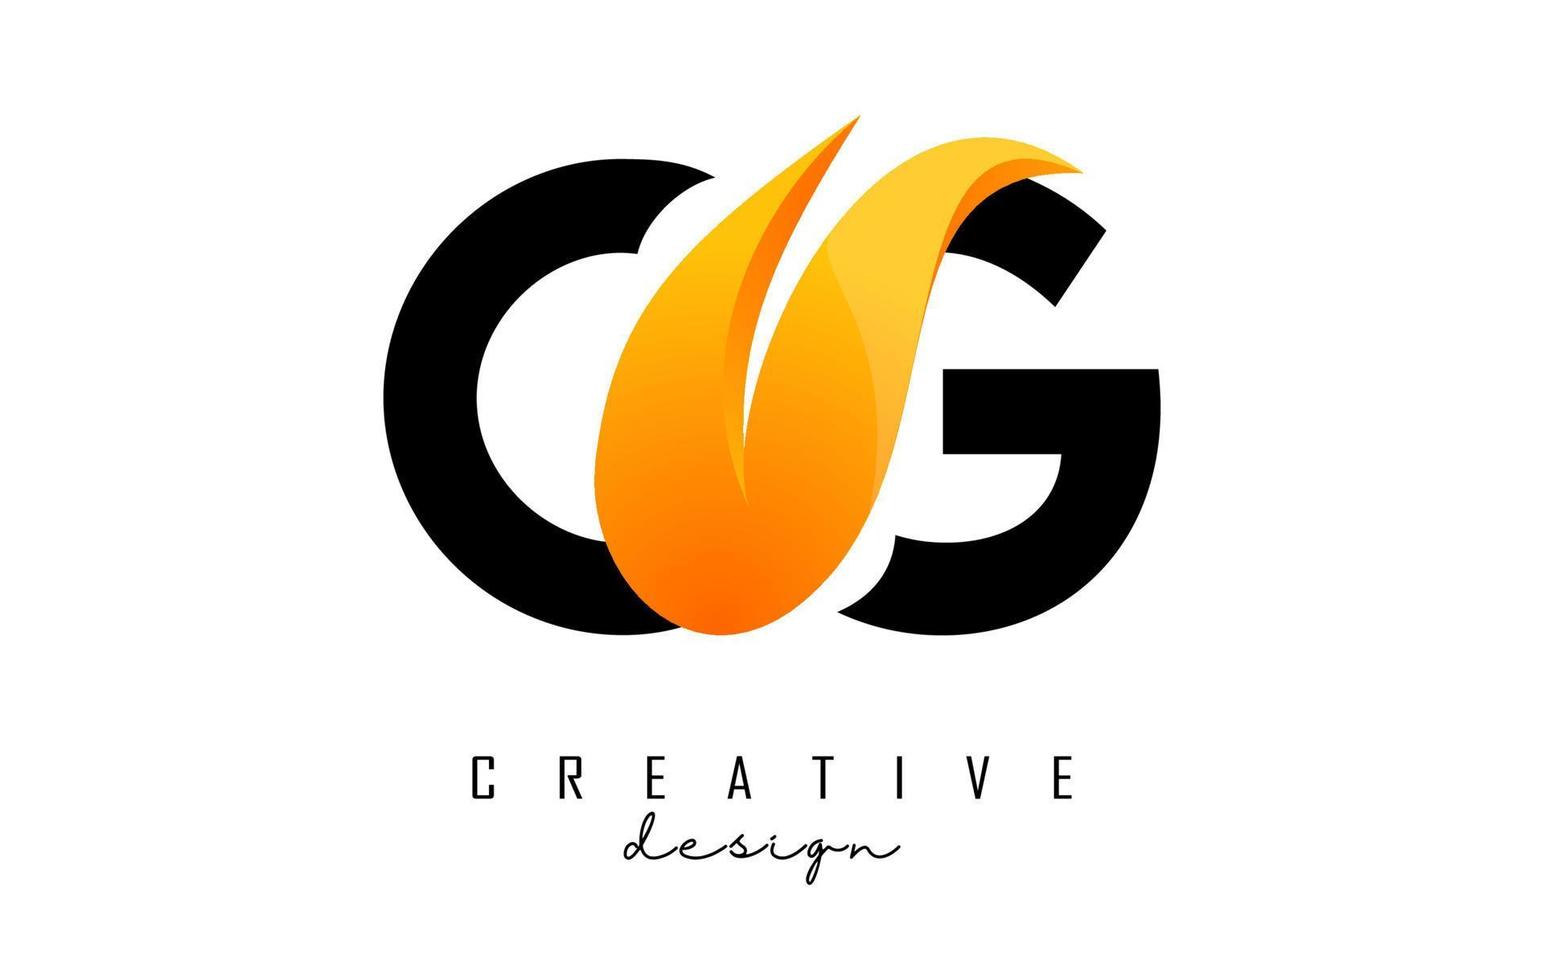 Vector illustration of abstract letters CG c g with fire flames and orange swoosh design.